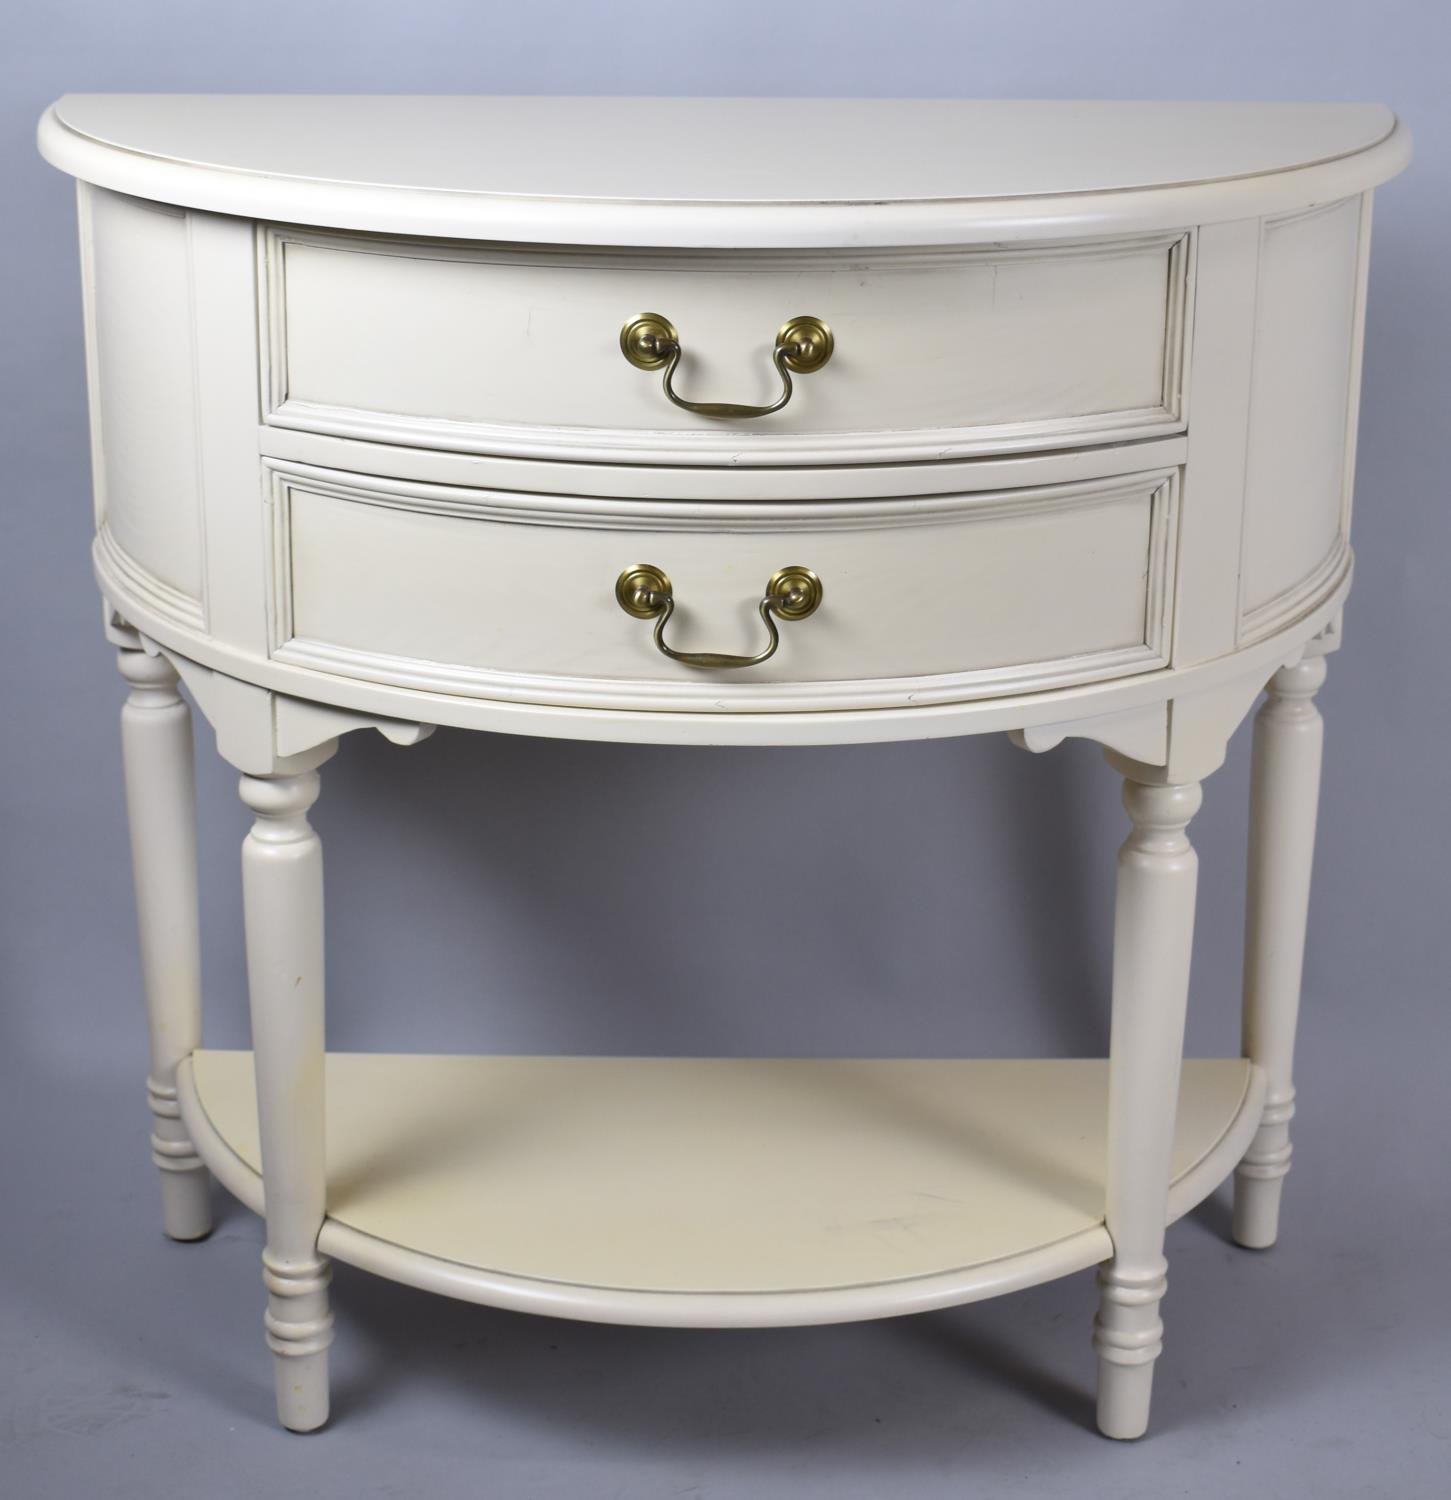 A Laura Ashley Cream Painted Demi Lune Side Table with Two Drawers and Stretcher Shelf, 85cm wide